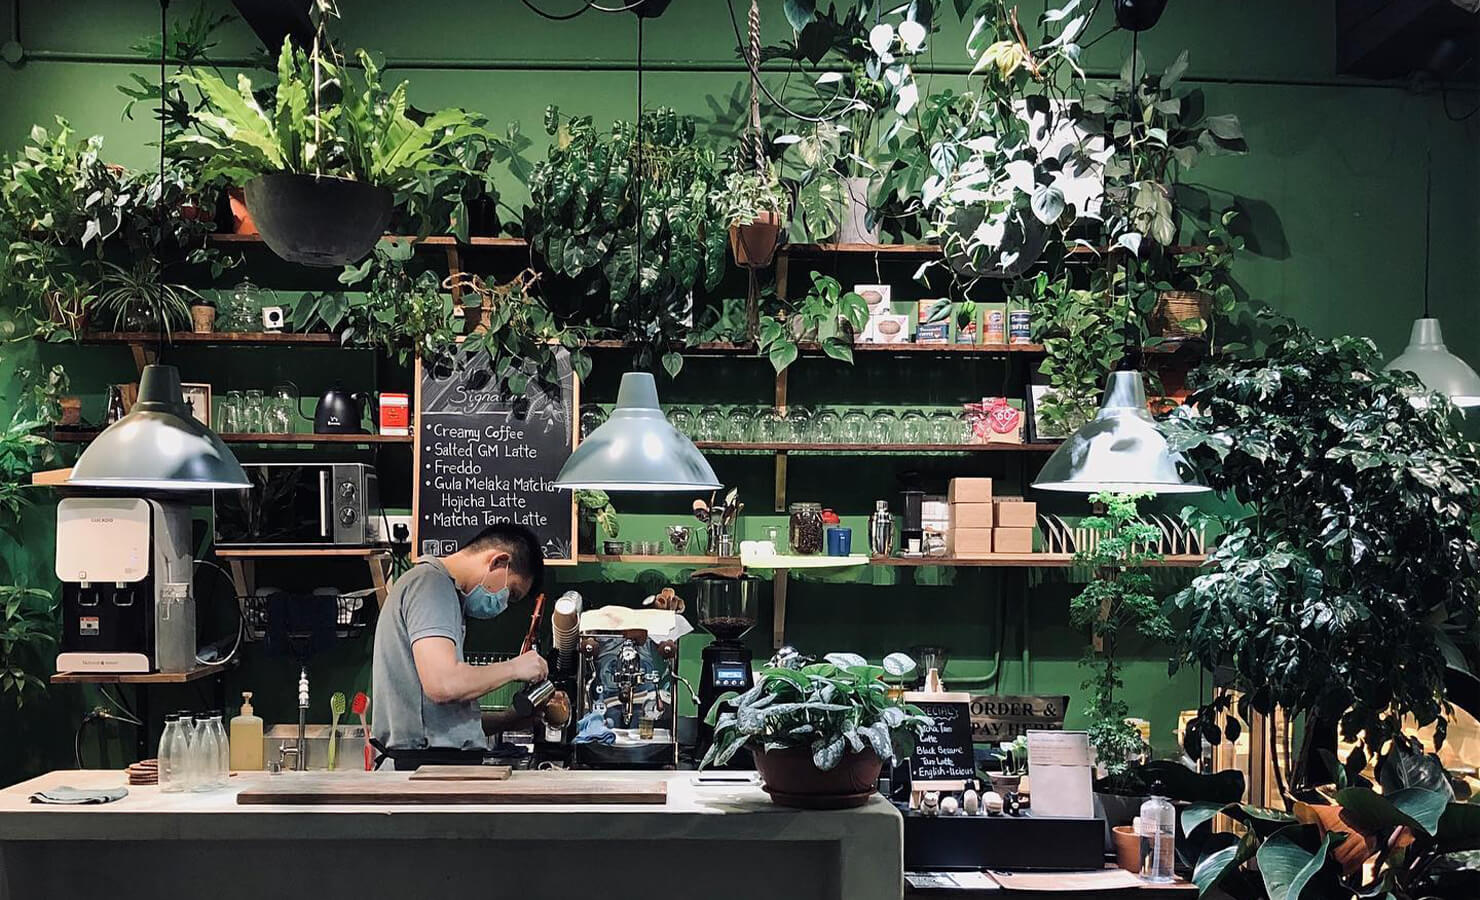 bloomthis-5-plant-flower-cafes-you-have-to-visit-01-coffee-barista